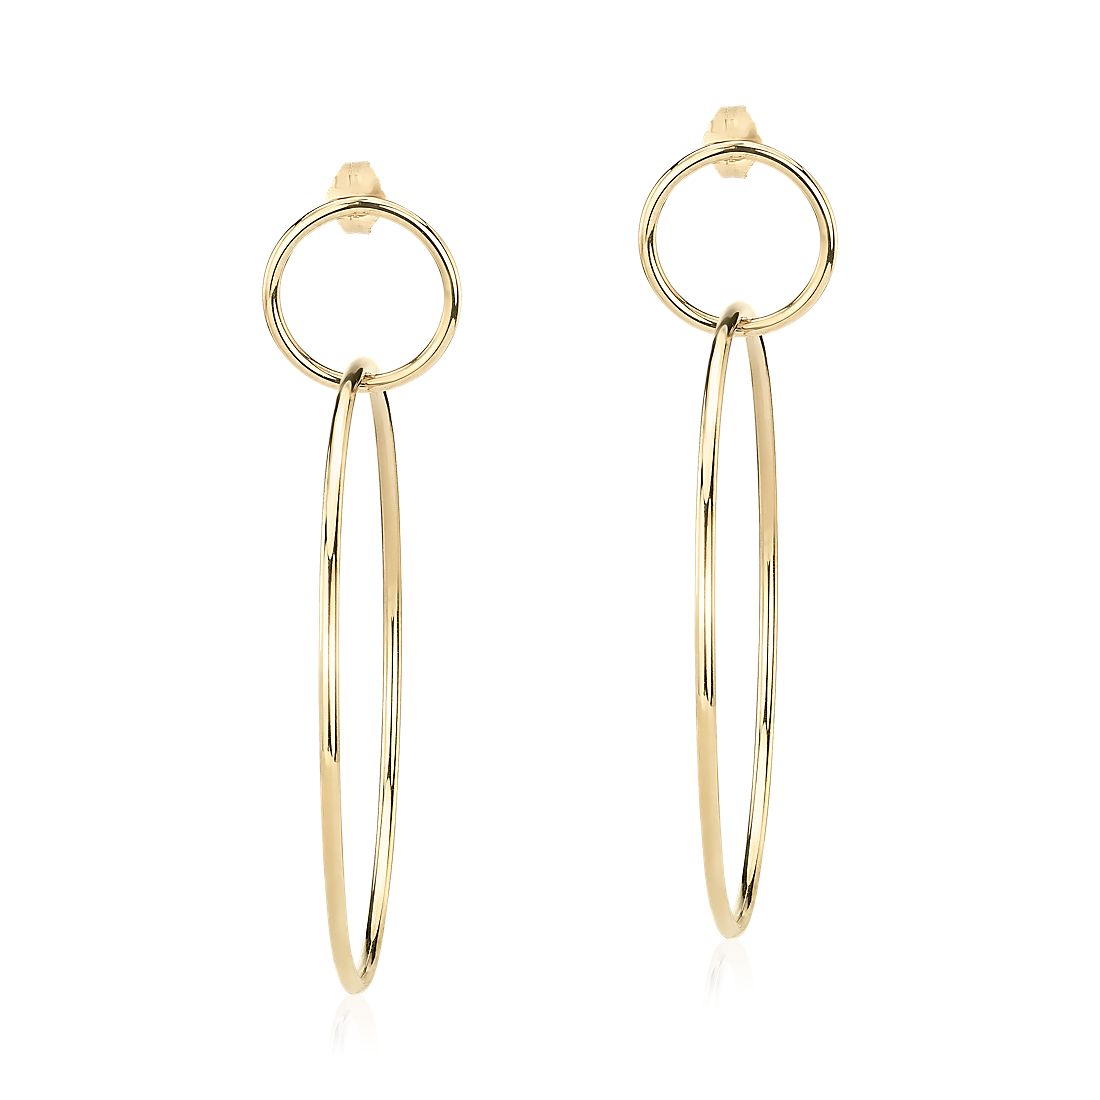 Large Front-Facing Double Hoop Earrings in 14k Yellow Gold